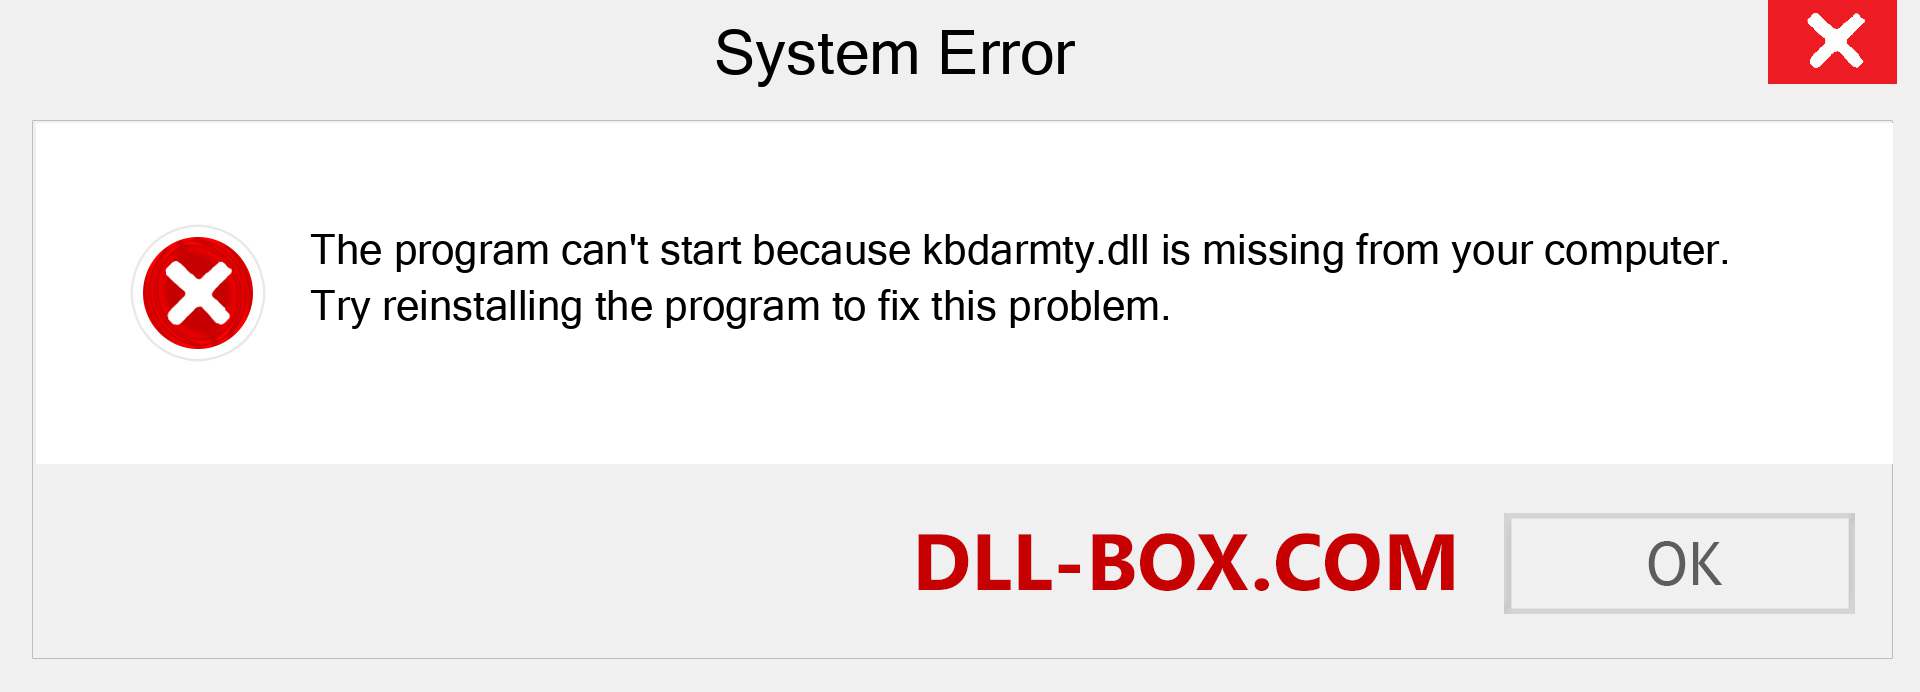  kbdarmty.dll file is missing?. Download for Windows 7, 8, 10 - Fix  kbdarmty dll Missing Error on Windows, photos, images